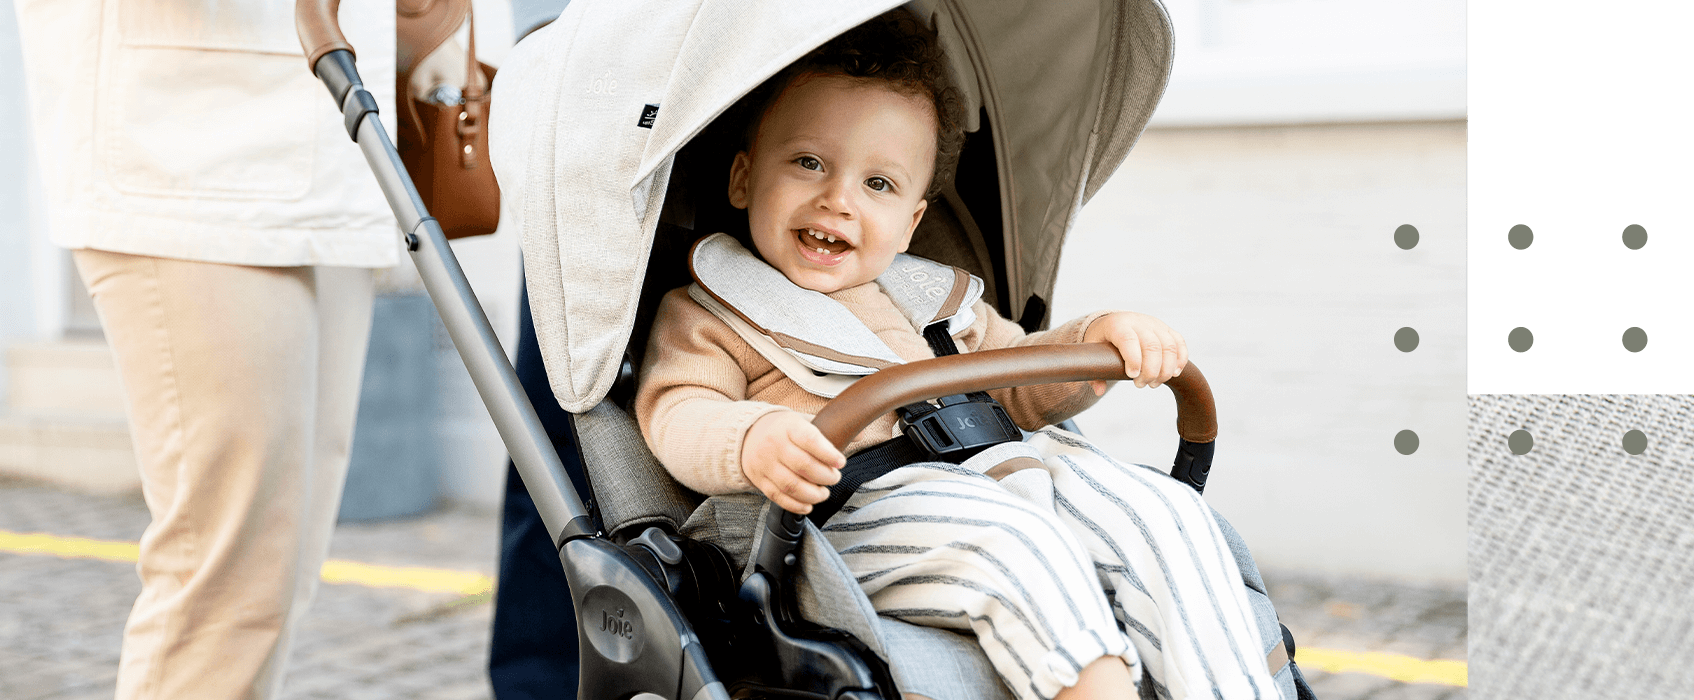 A young curly-haired toddler smiling toward the camera while being pushed in a gray Joie Finiti pram.